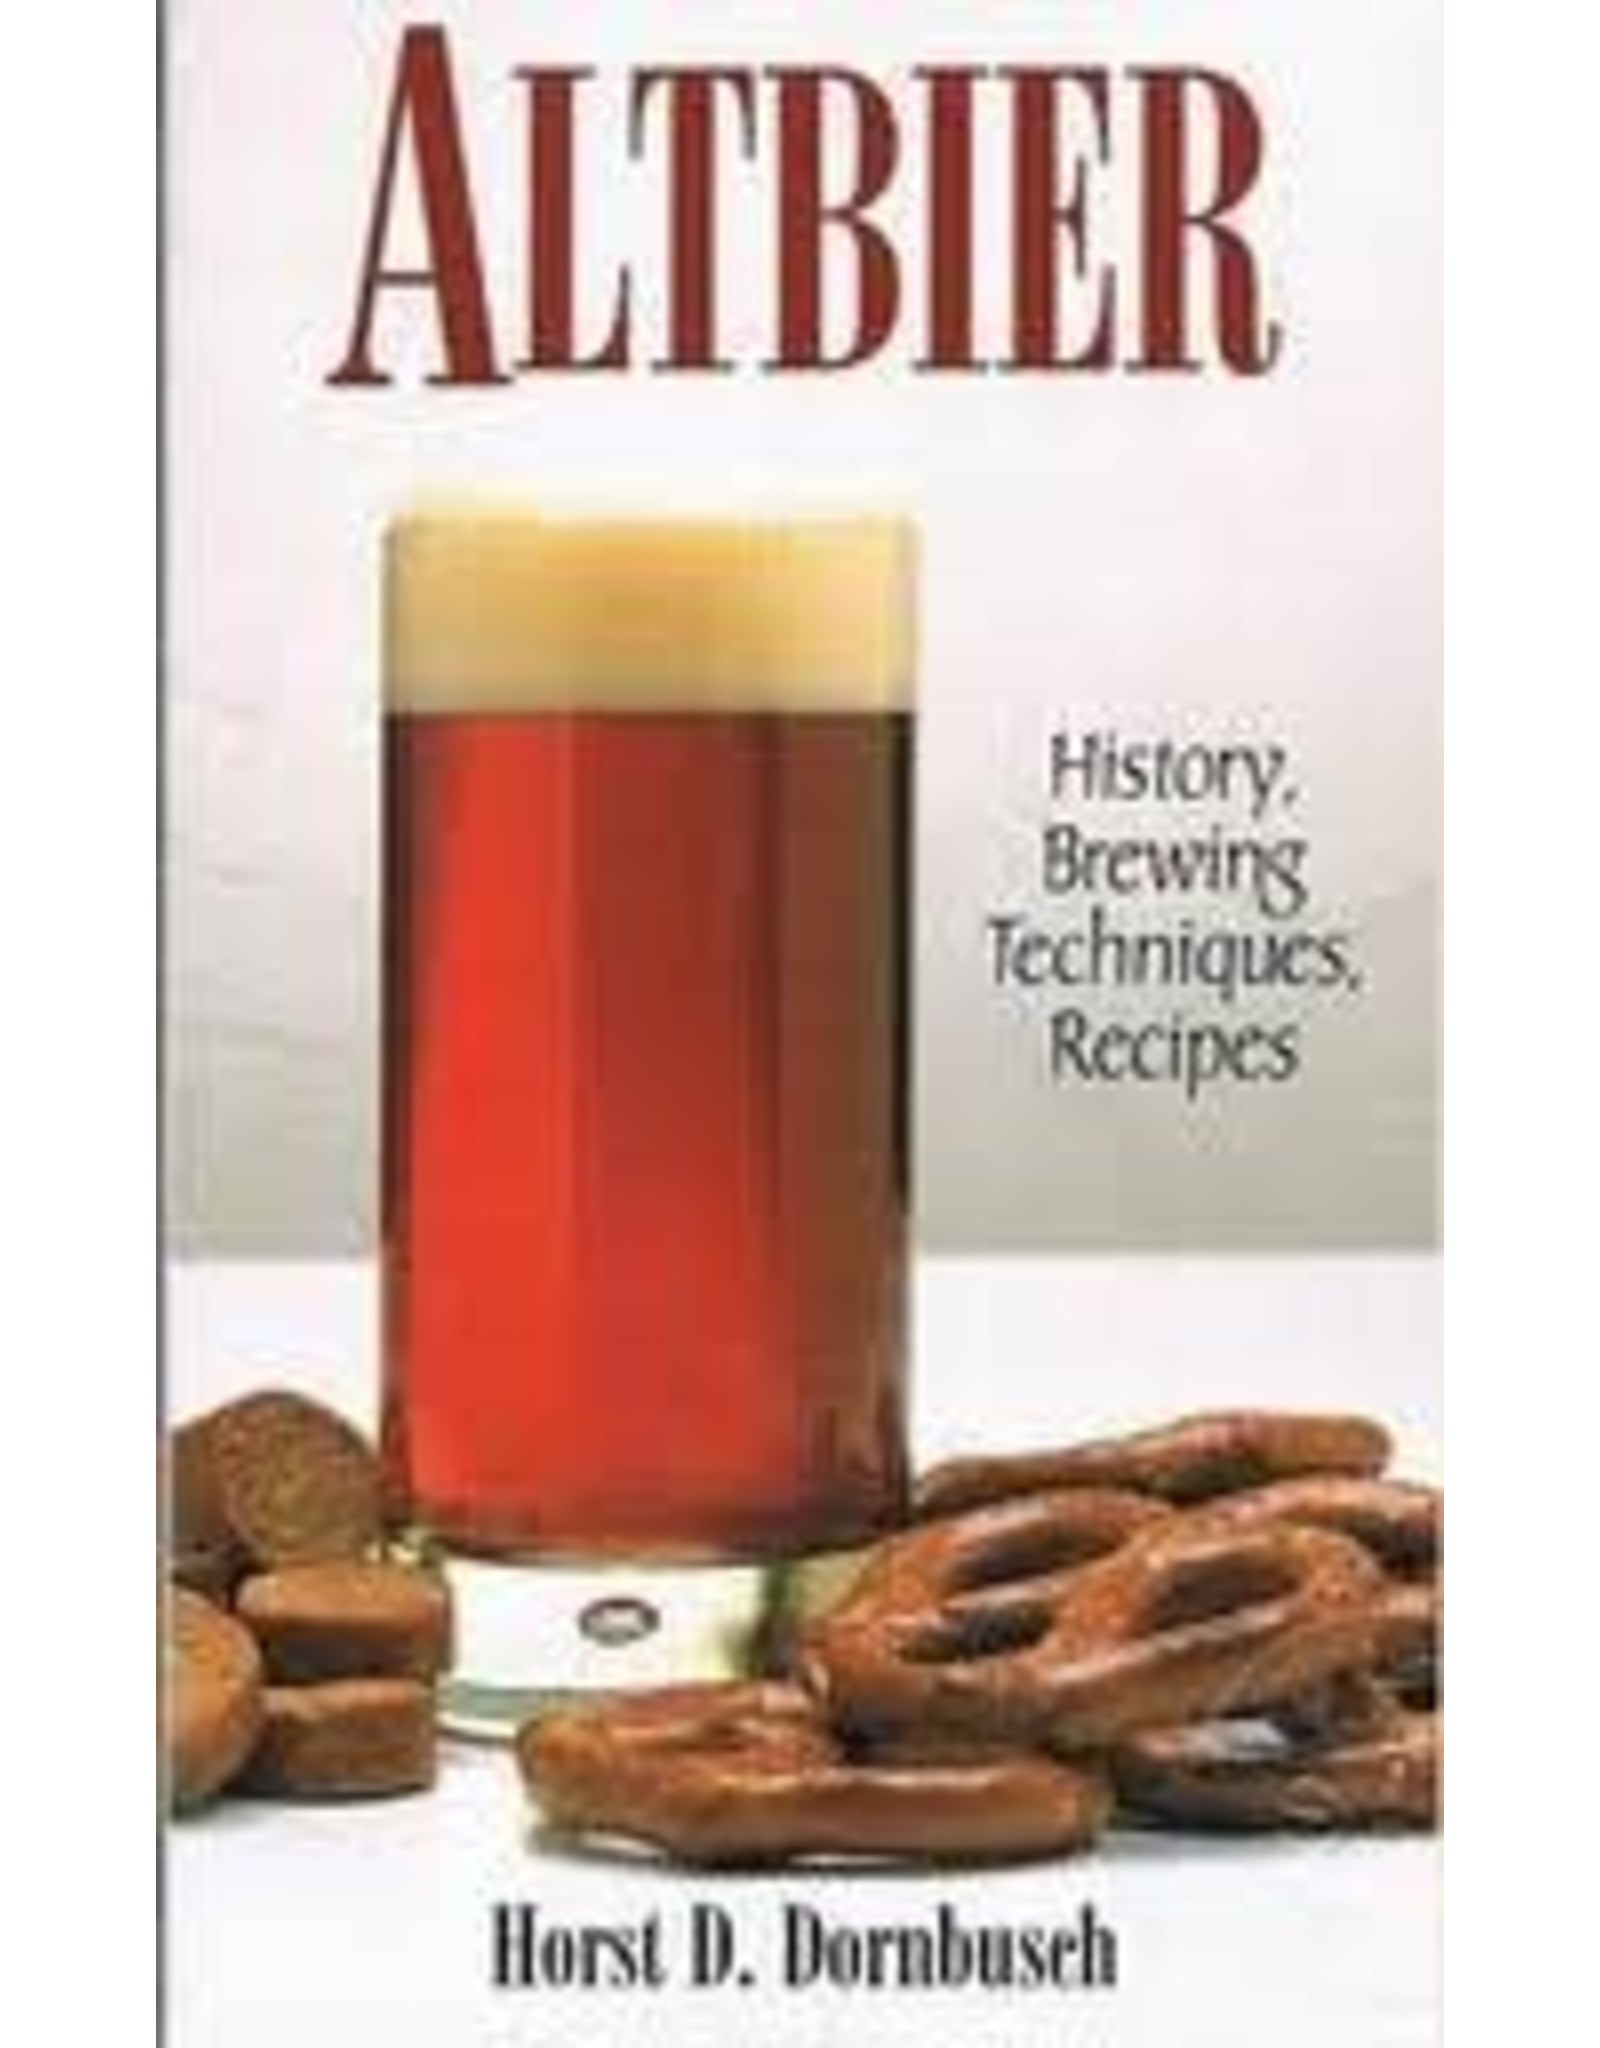 CLASSIC BEER STYLE ALTBIER